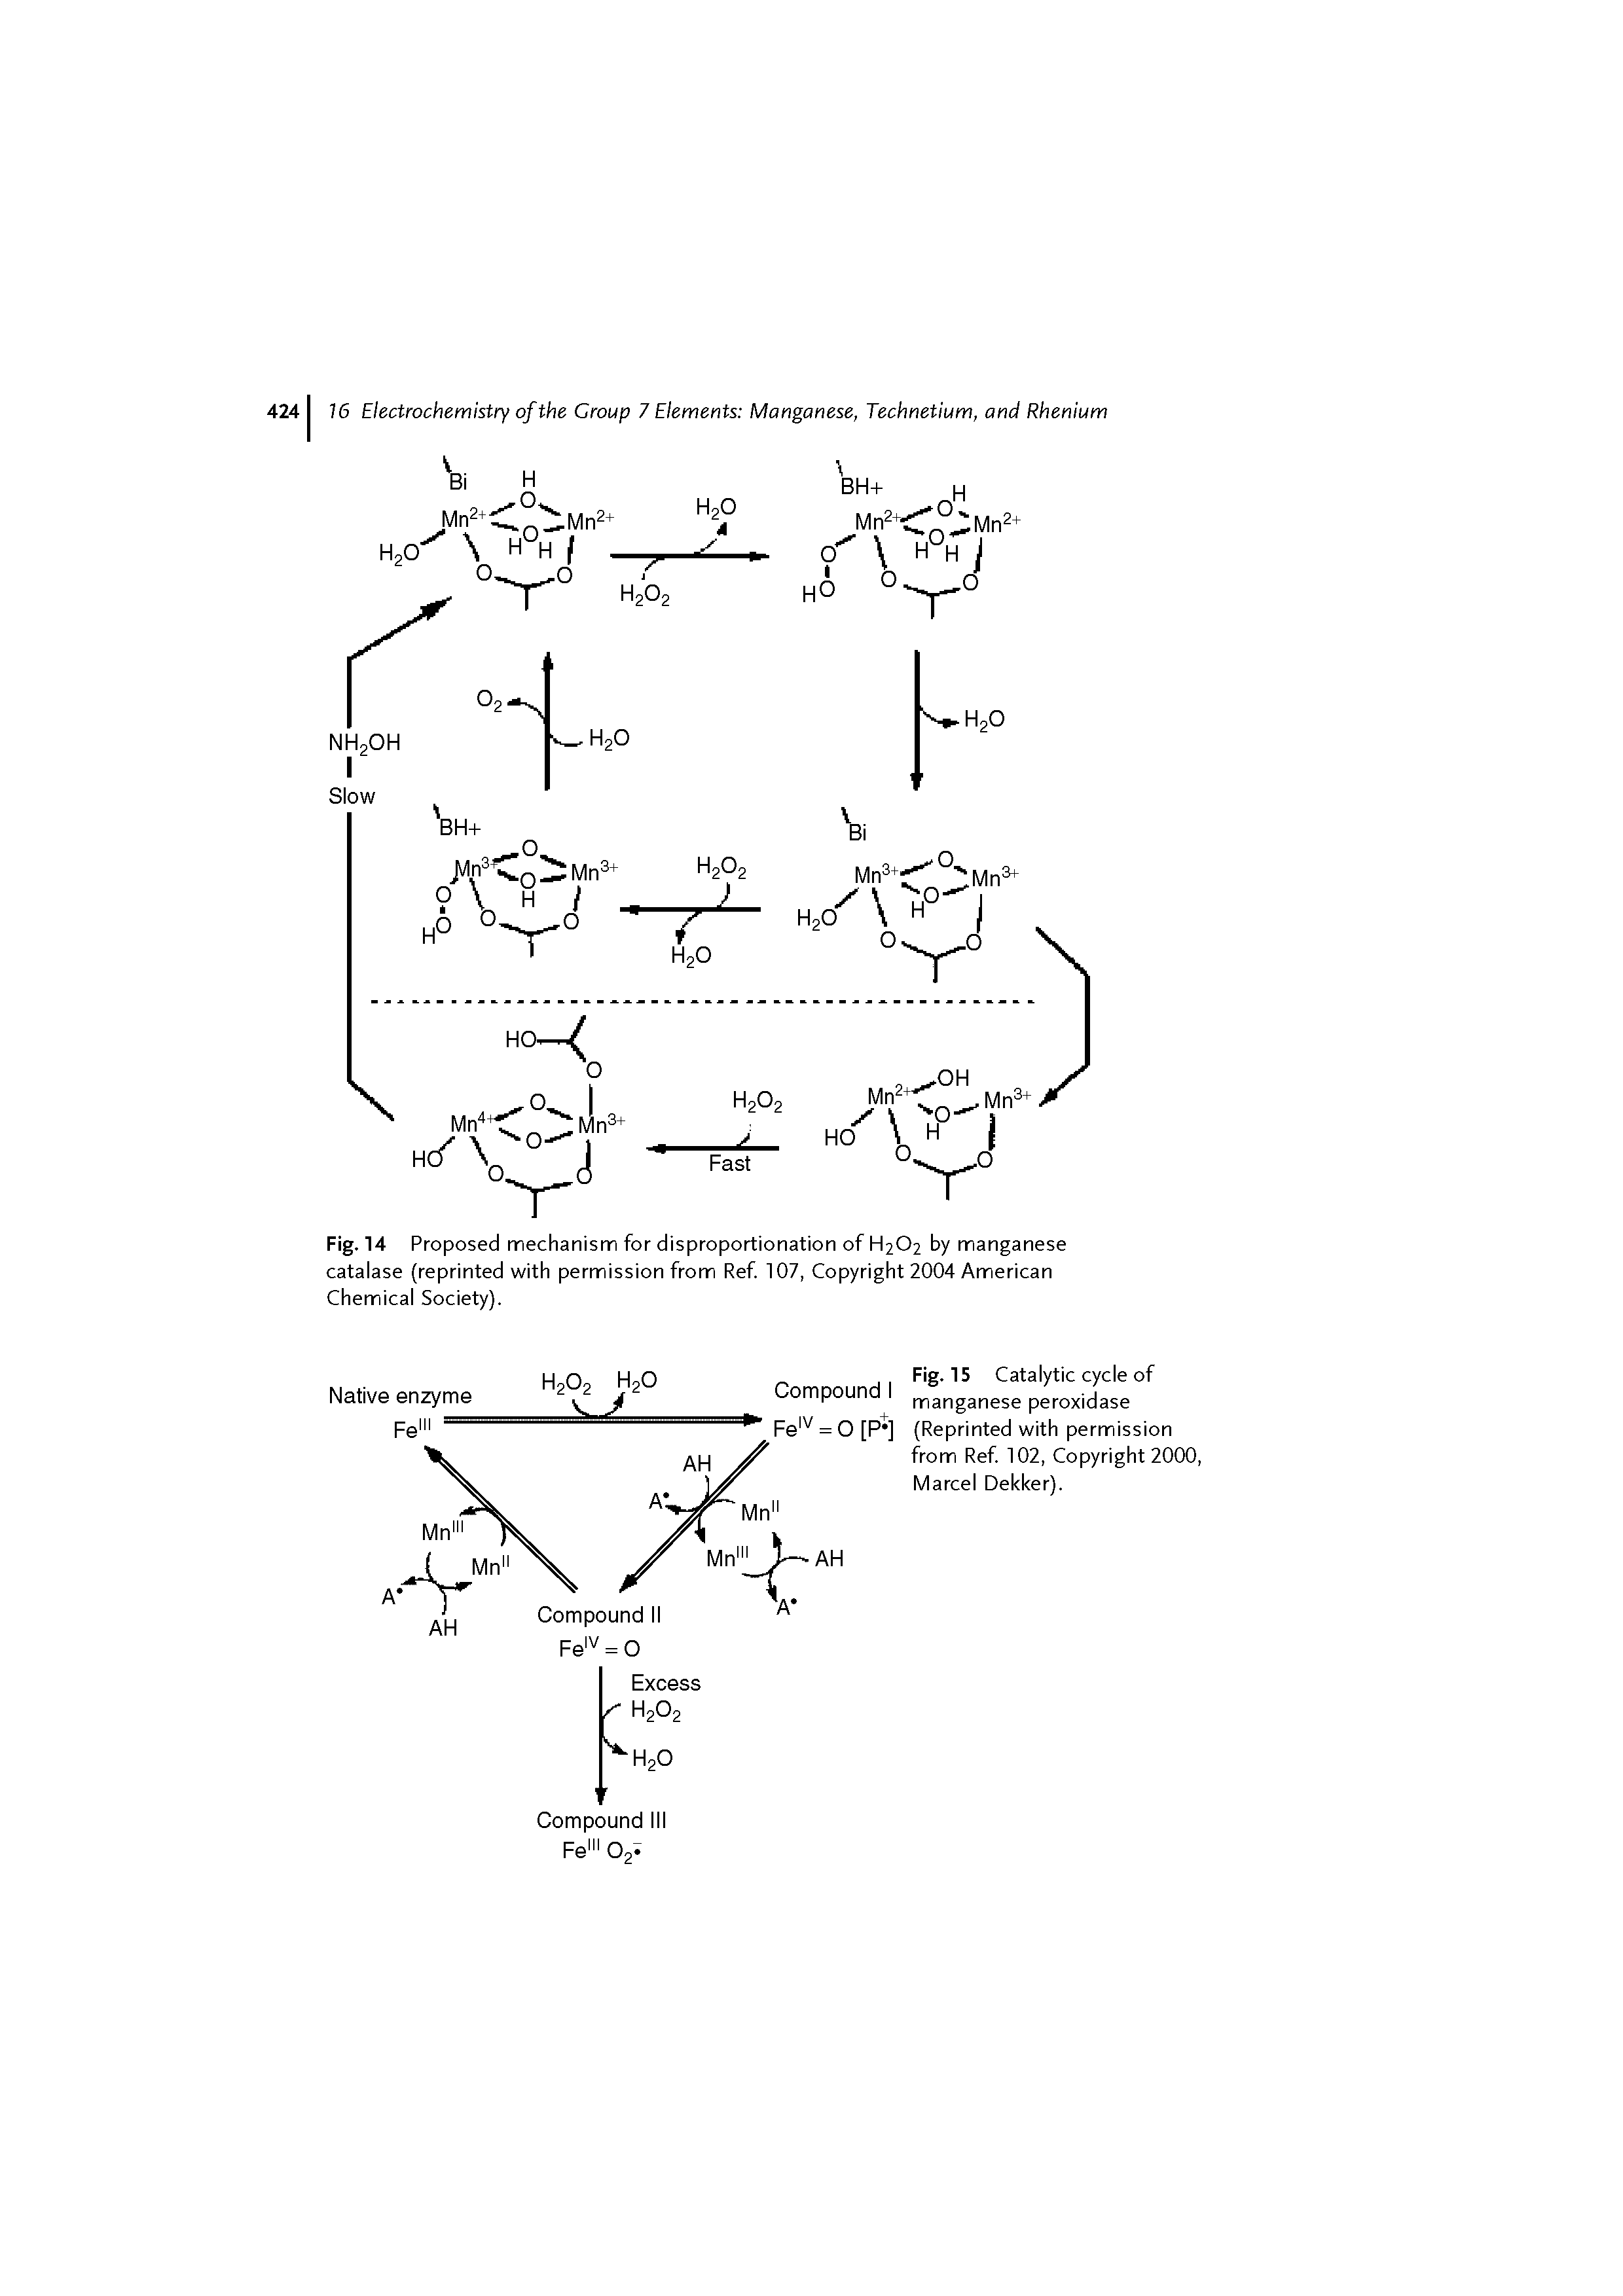 Fig. 14 Proposed mechanism for disproportionation of H2O2 by manganese catalase (reprinted with permission from Ref 107, Copyright 2004 American Chemical Society).